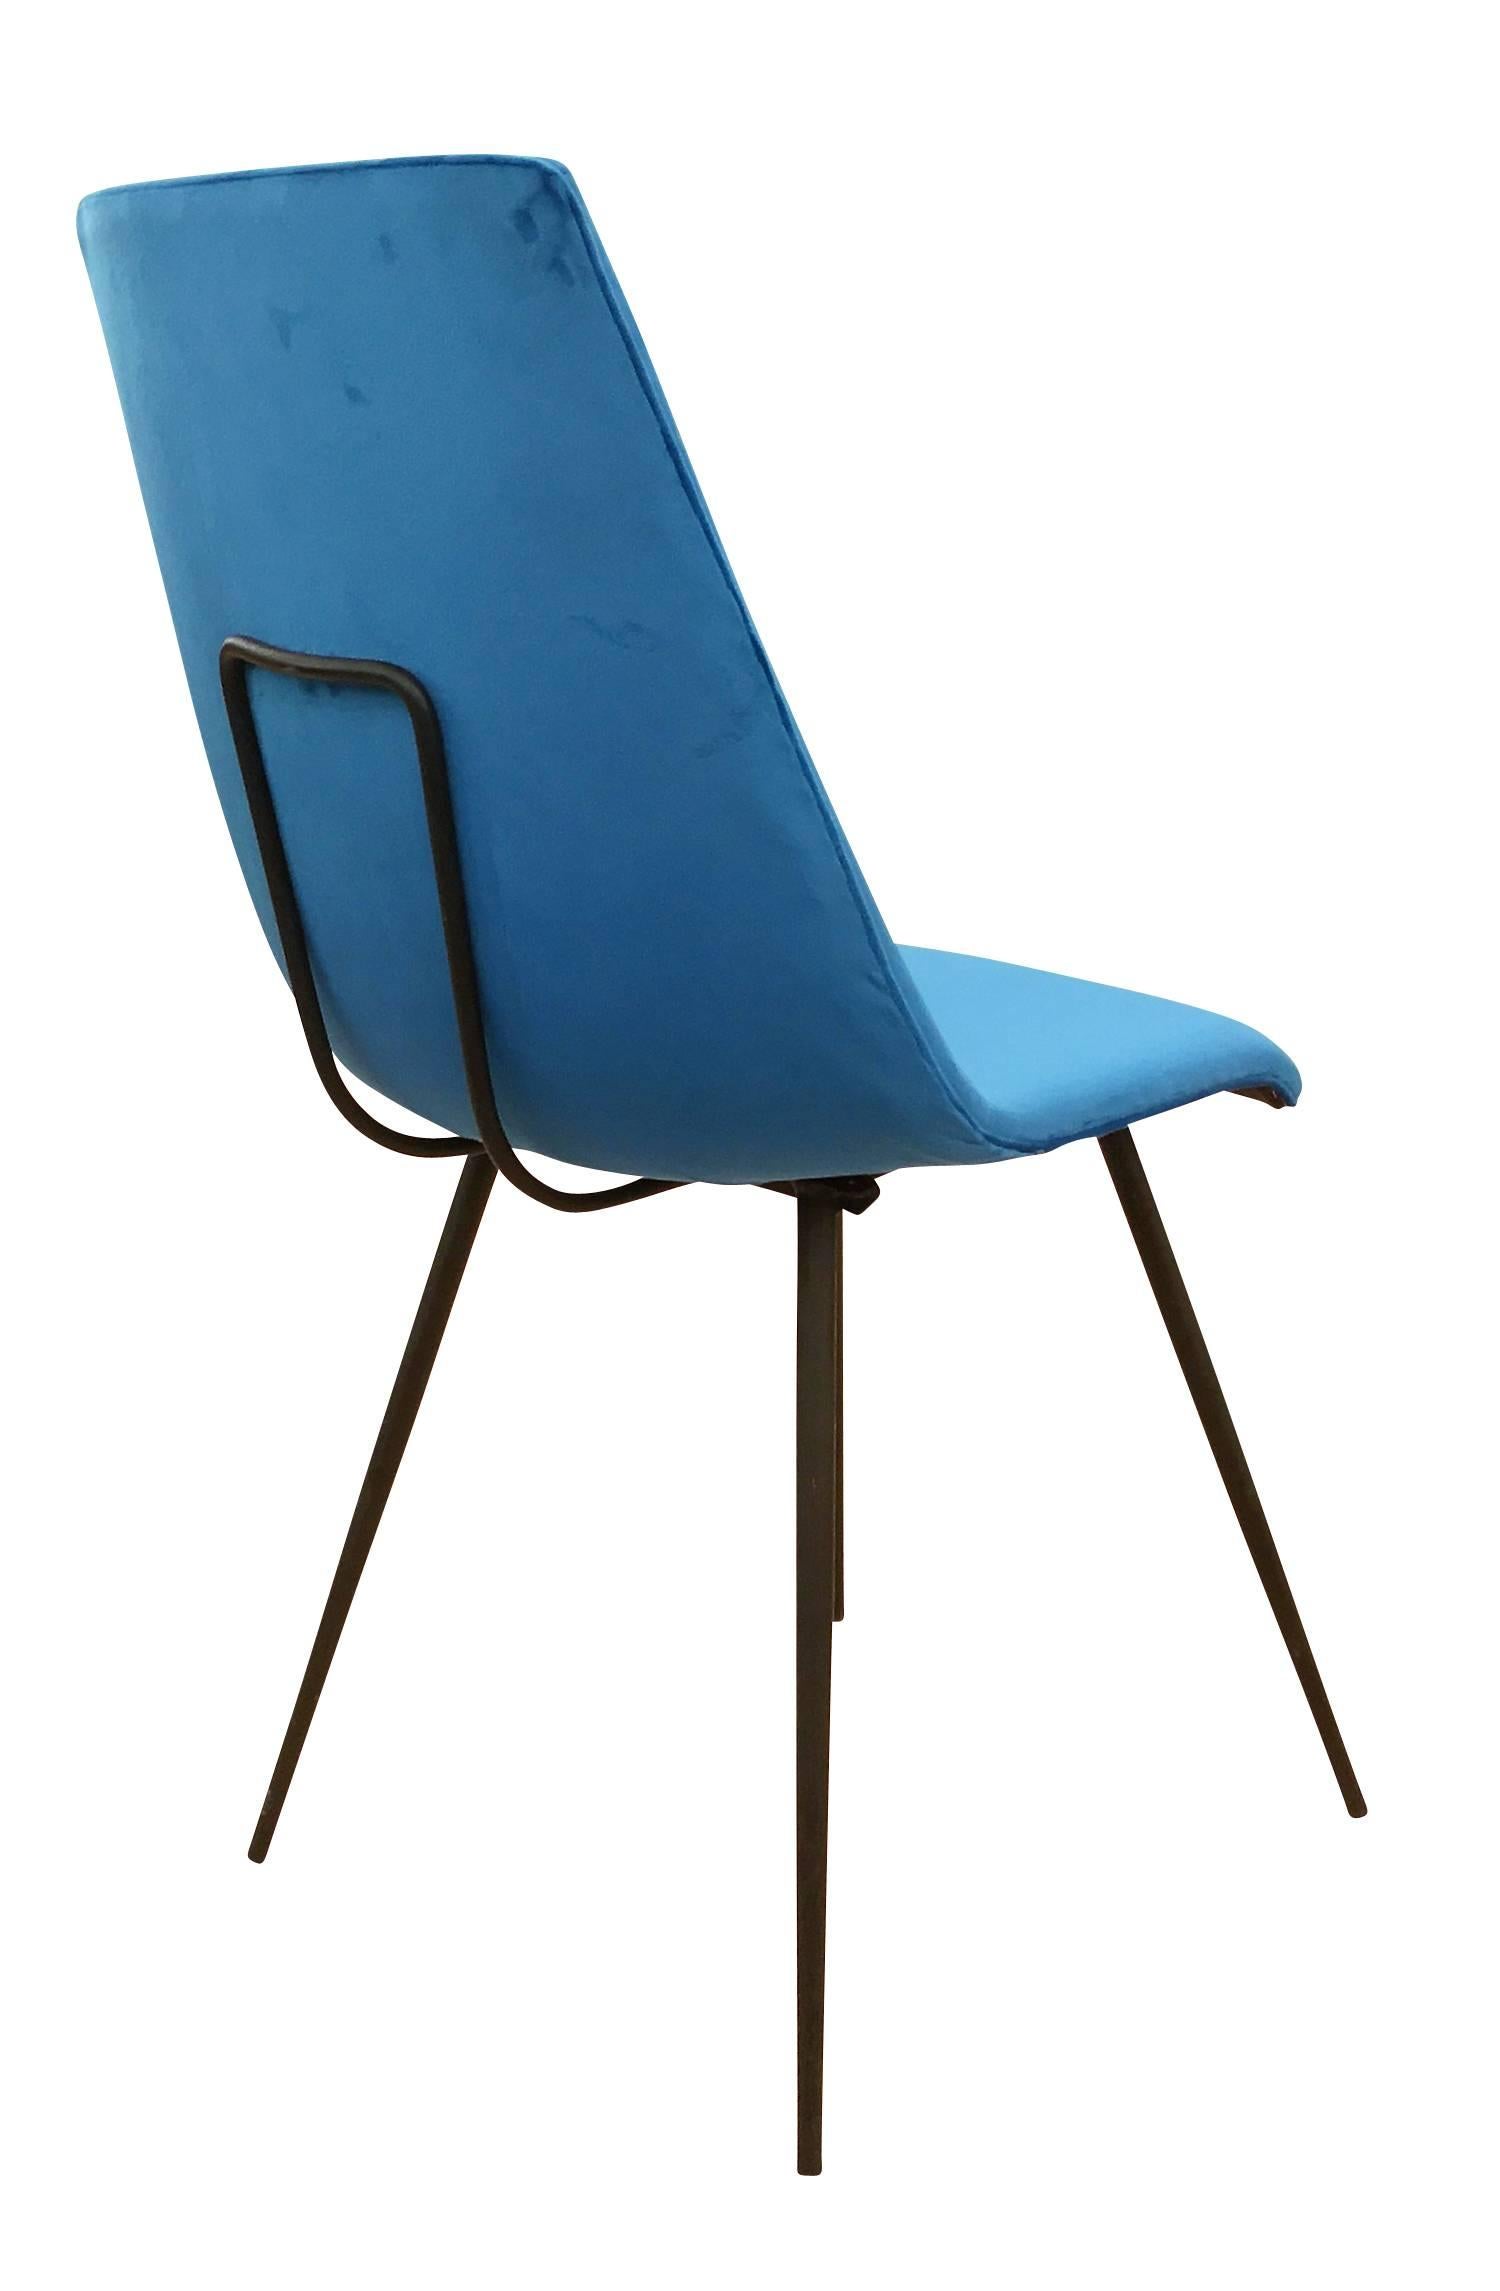 Set of six simple yet sophisticated Italian dining chairs from the the 1950s. The frame is lacquered black. Only one has been re-upholstered in a blue velvet for display purposes. Please contact us for upholstery options.
